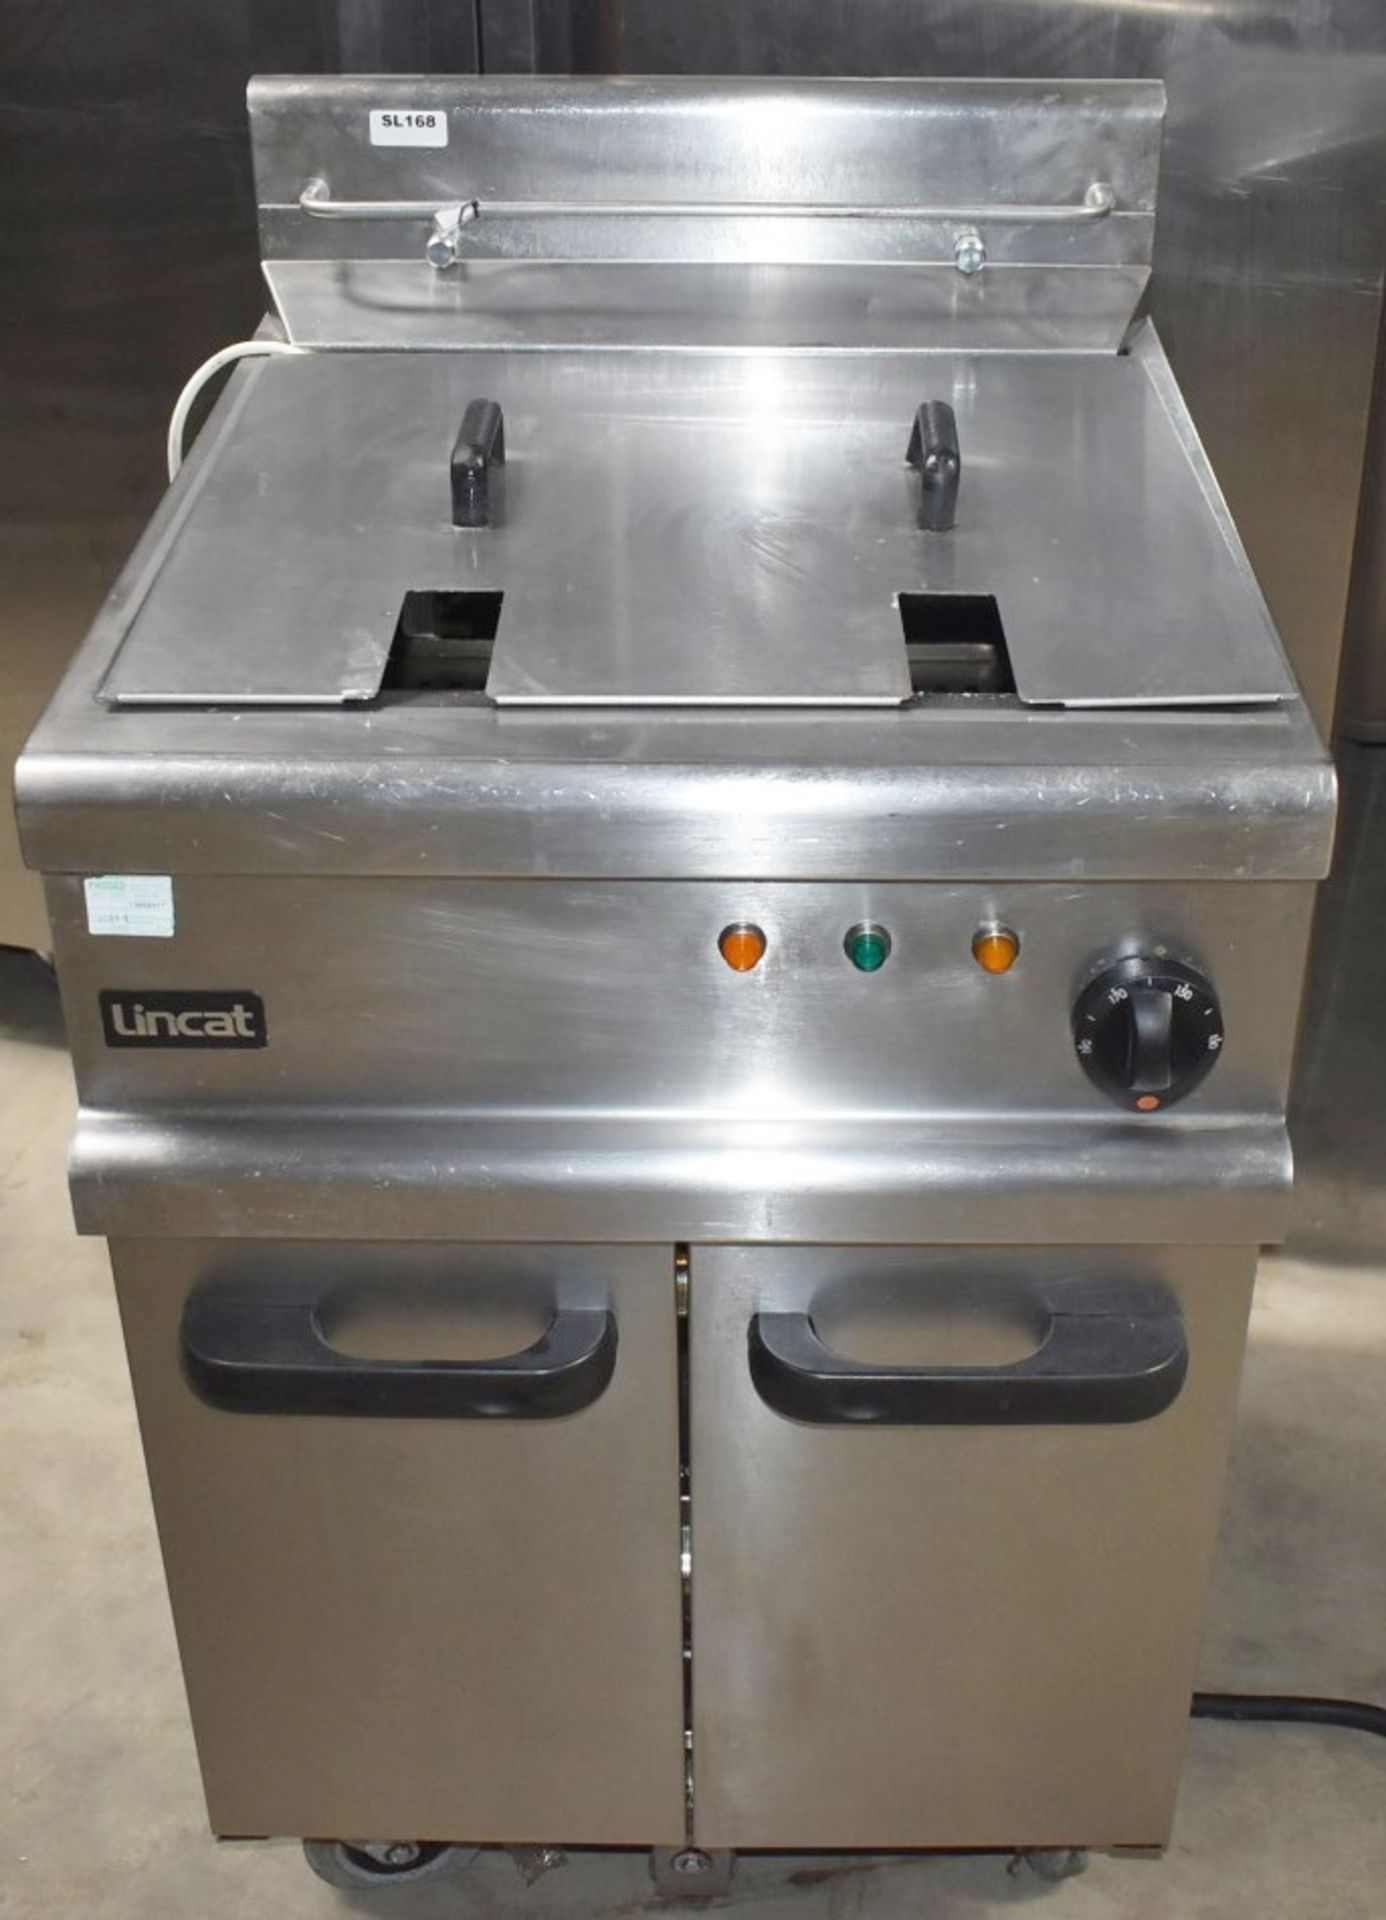 1 x Lincat Opus 700 Single Tank Electric Fryer With Built In Filtration - 3 Phase - Approx RRP £3, - Image 13 of 19